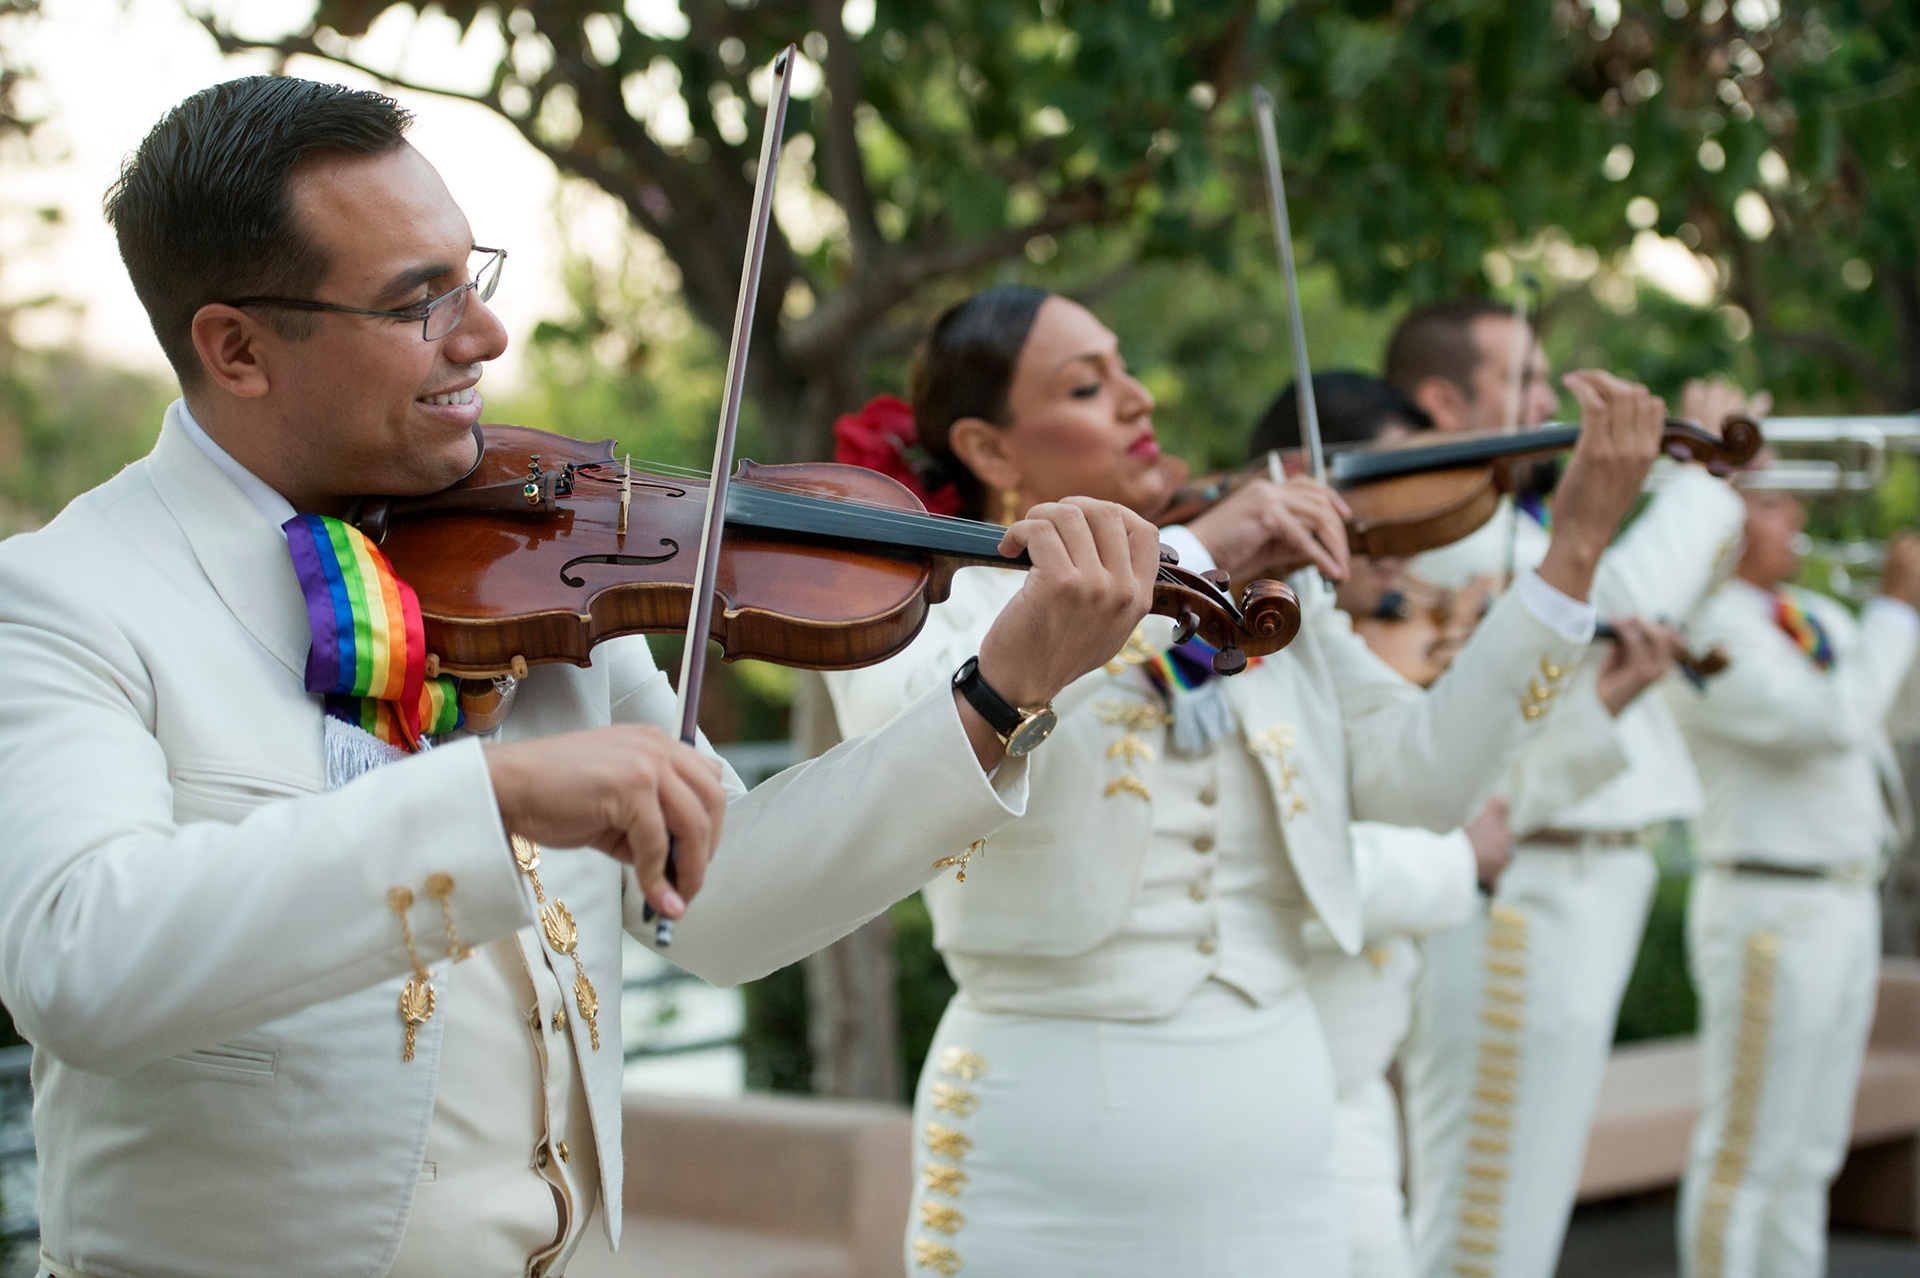 A Mariachi band plays for a group of spectators.